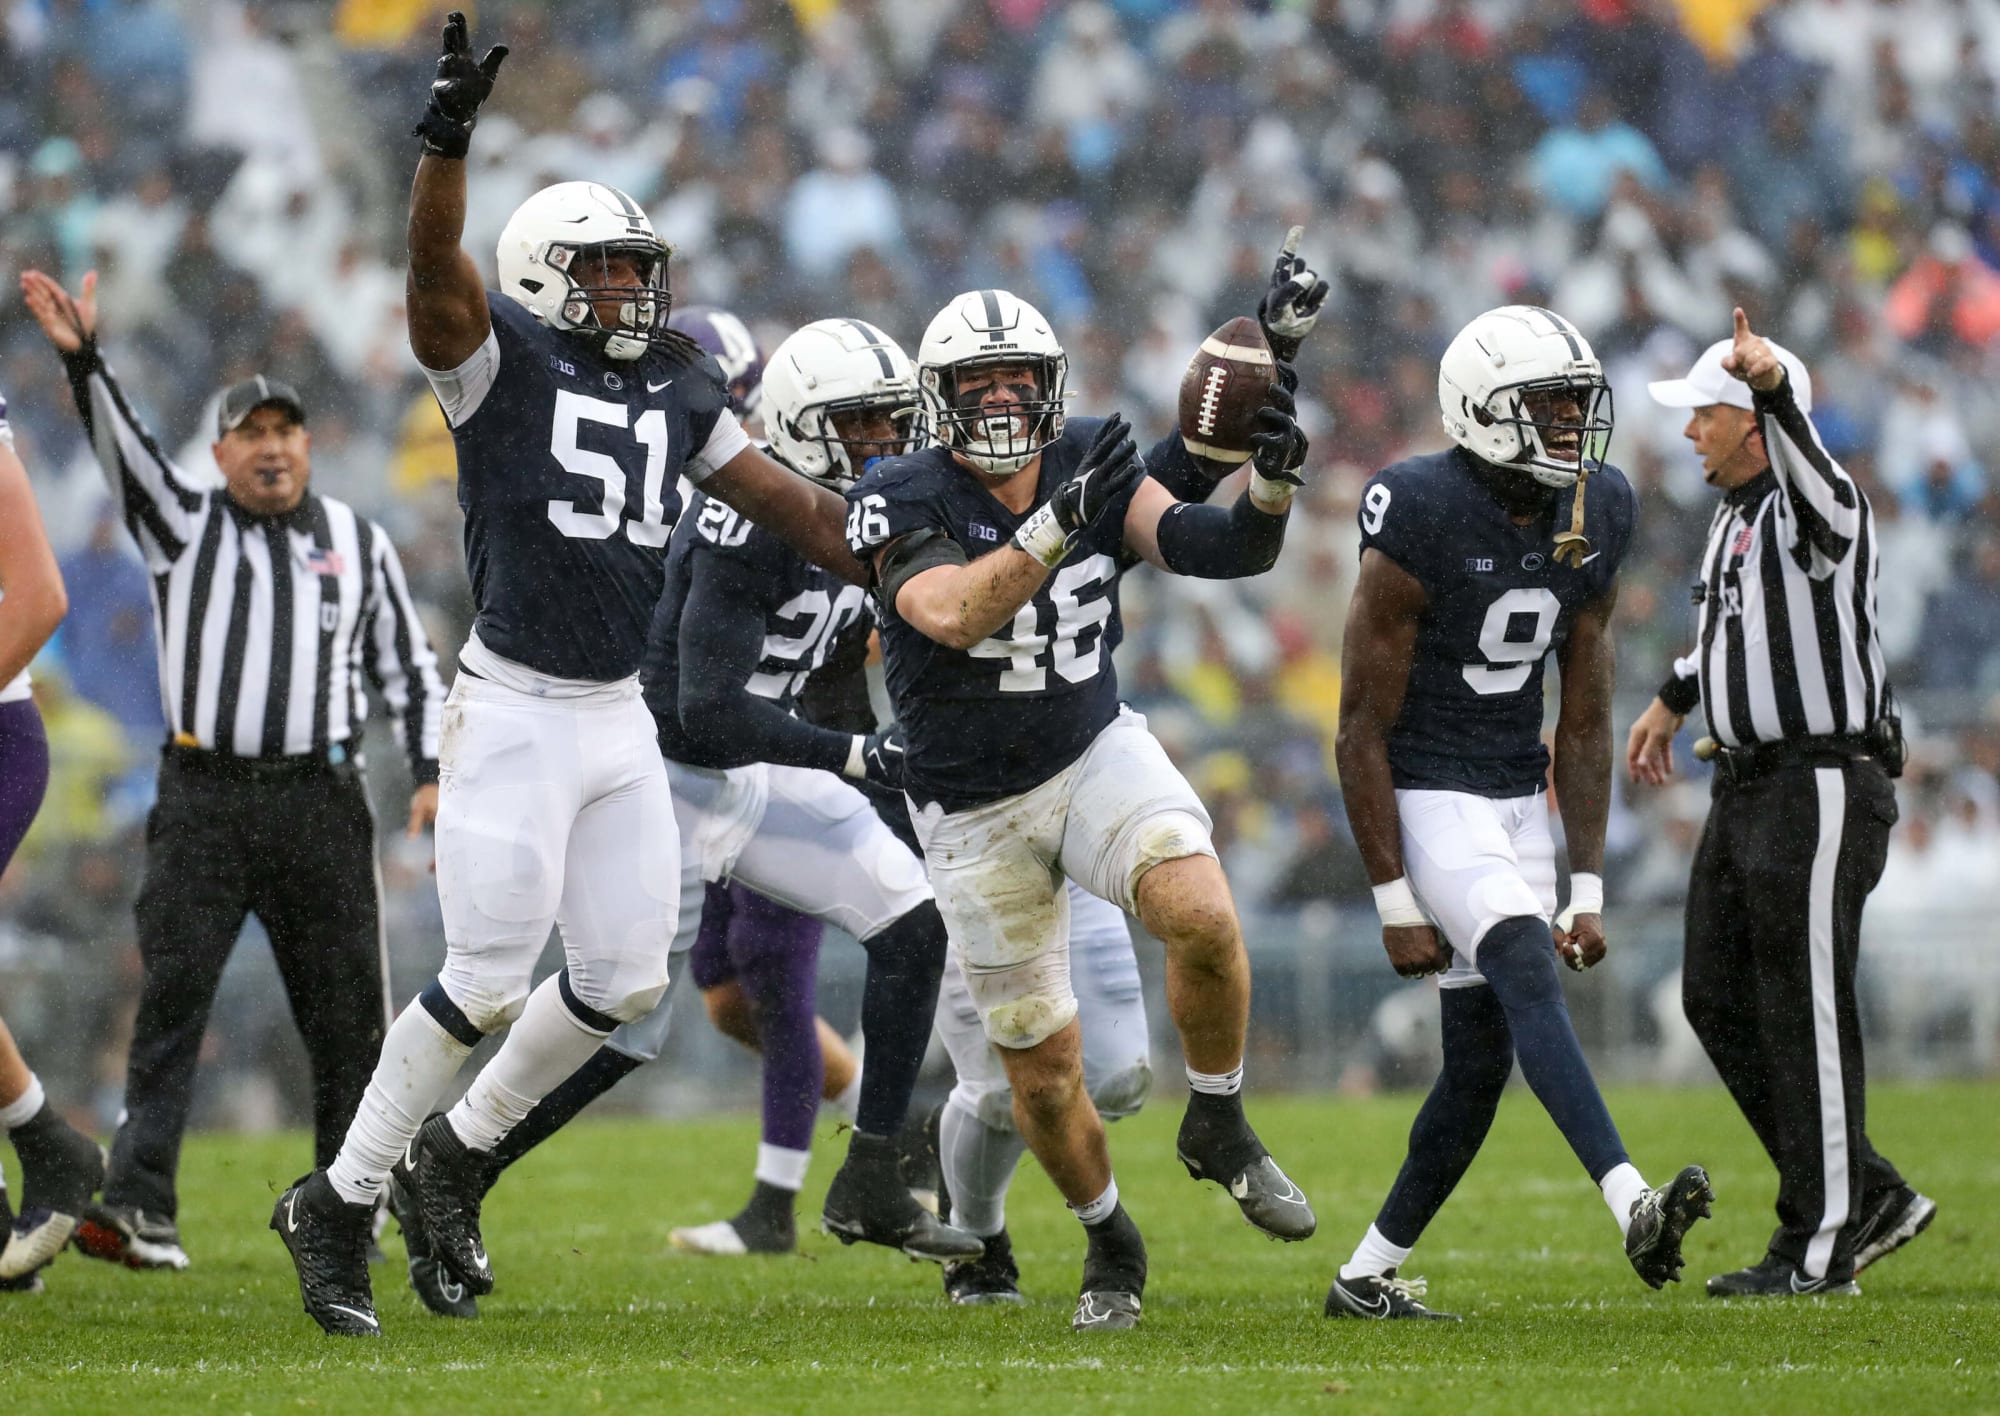 Big Ten Power Rankings: Penn State and the East continue to dominate